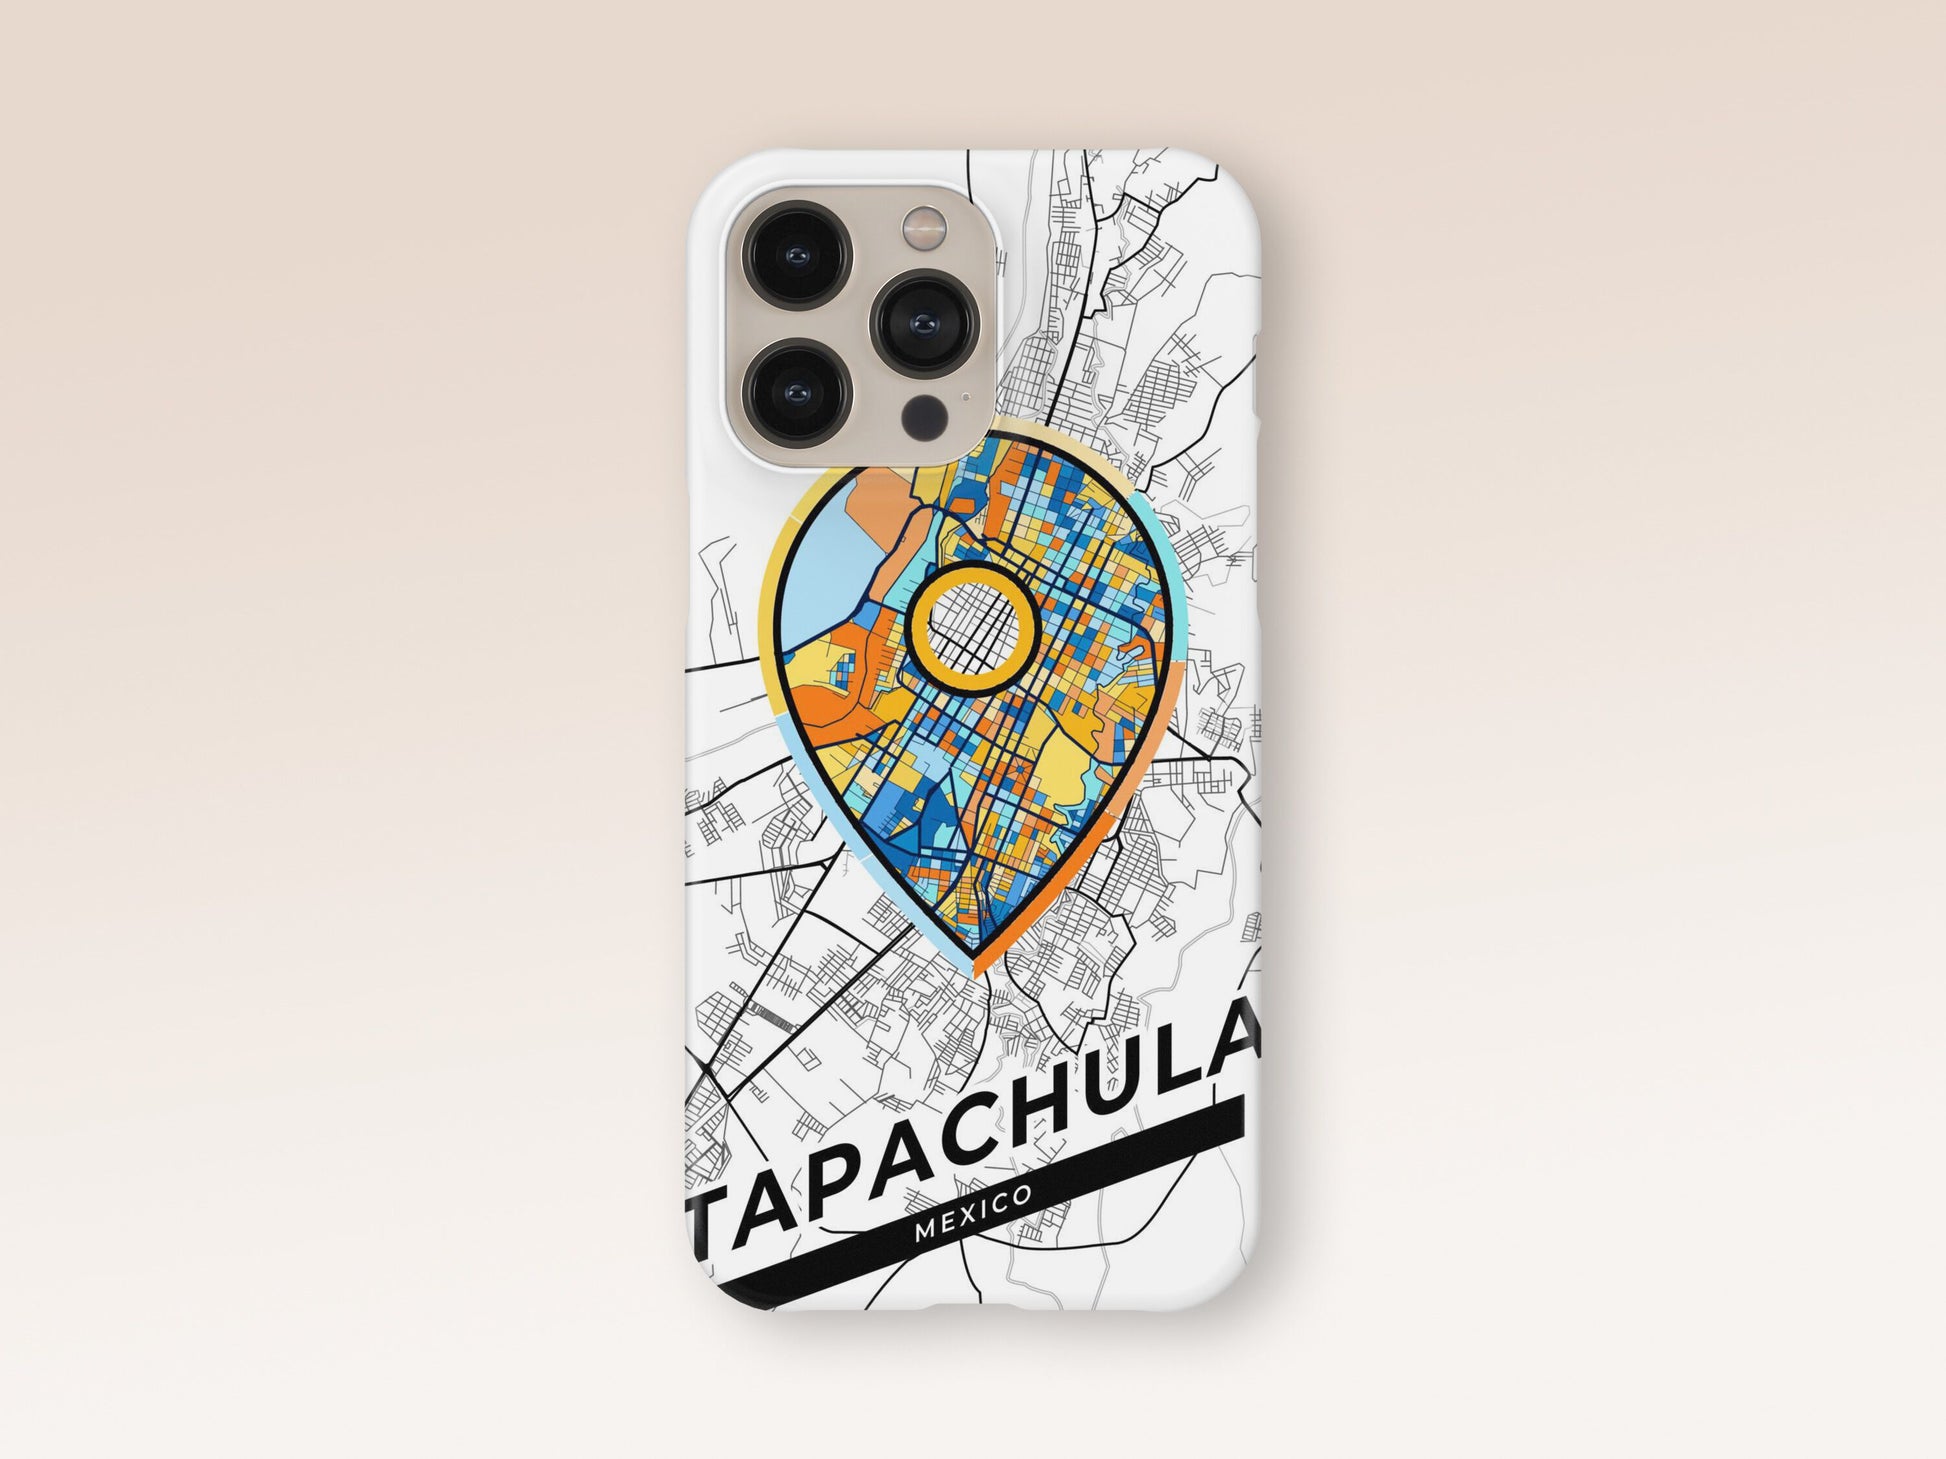 Tapachula Mexico slim phone case with colorful icon 1